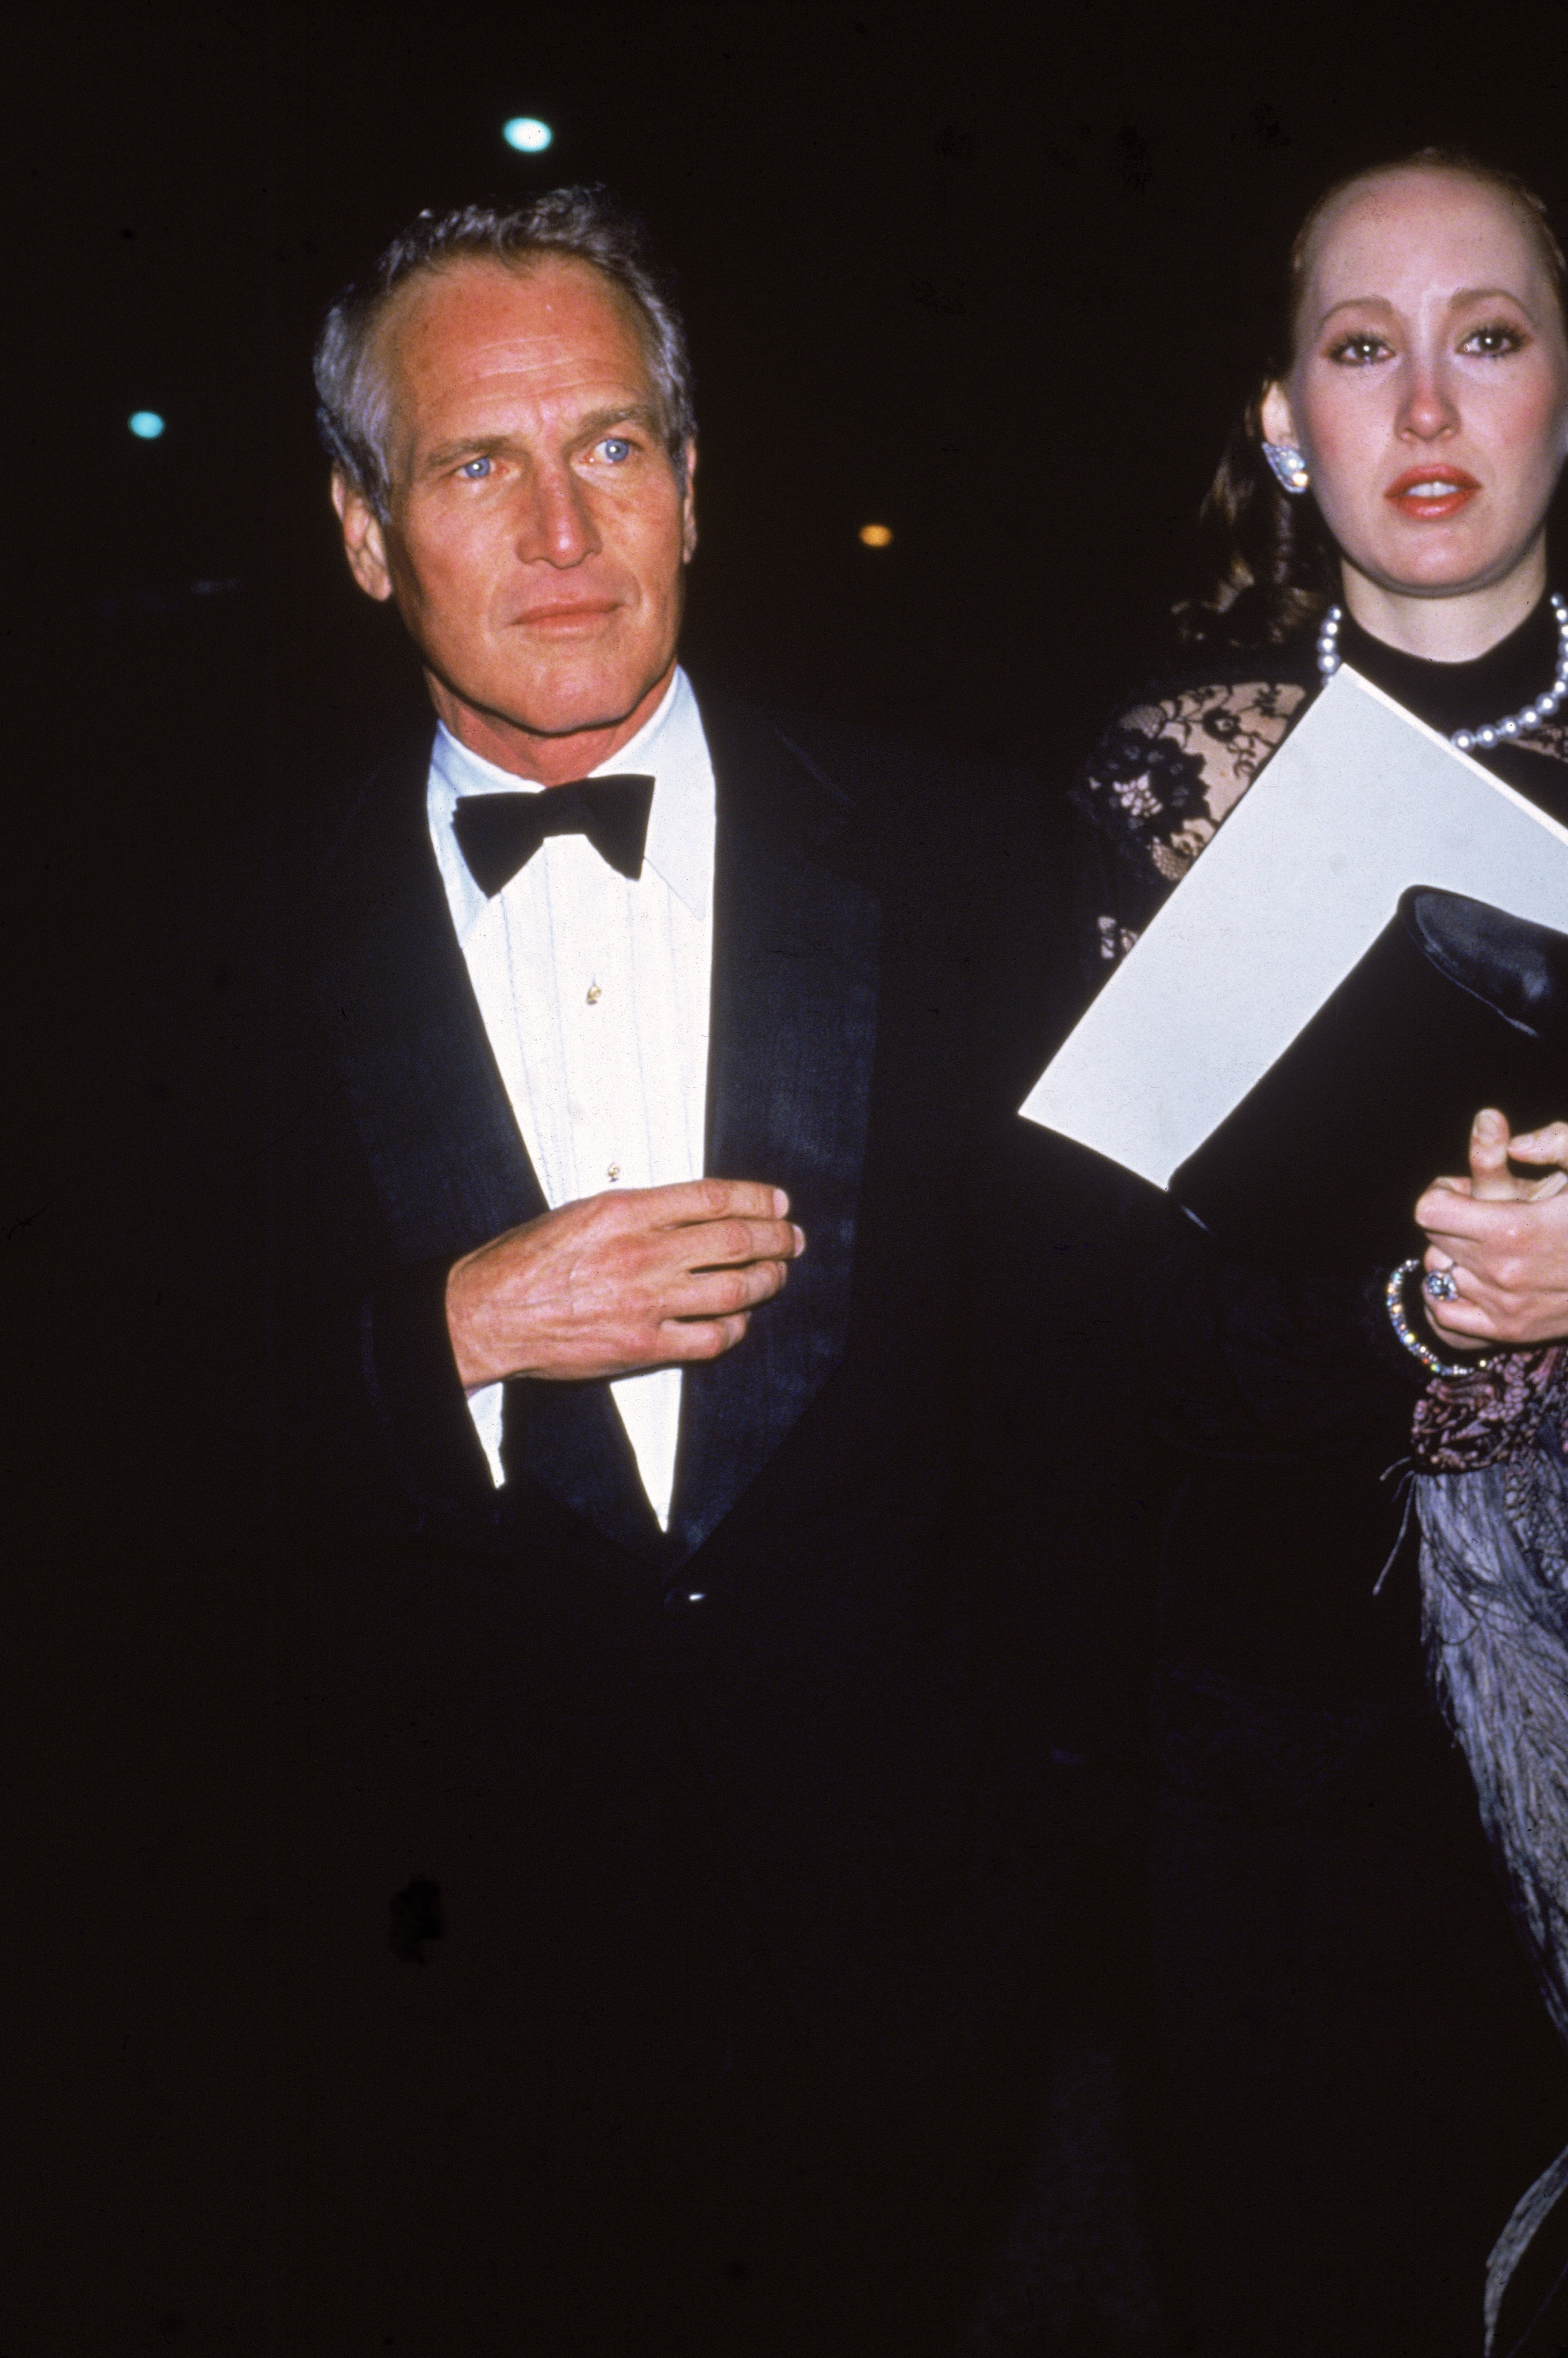 American actor Paul Newman and his daughter, actress Susan Kendall Newman, arrive at the Dorothy Chandler Pavilion for the Academy Awards Ceremony, Los Angeles, California, April 11, 1983. | Source: Getty Images